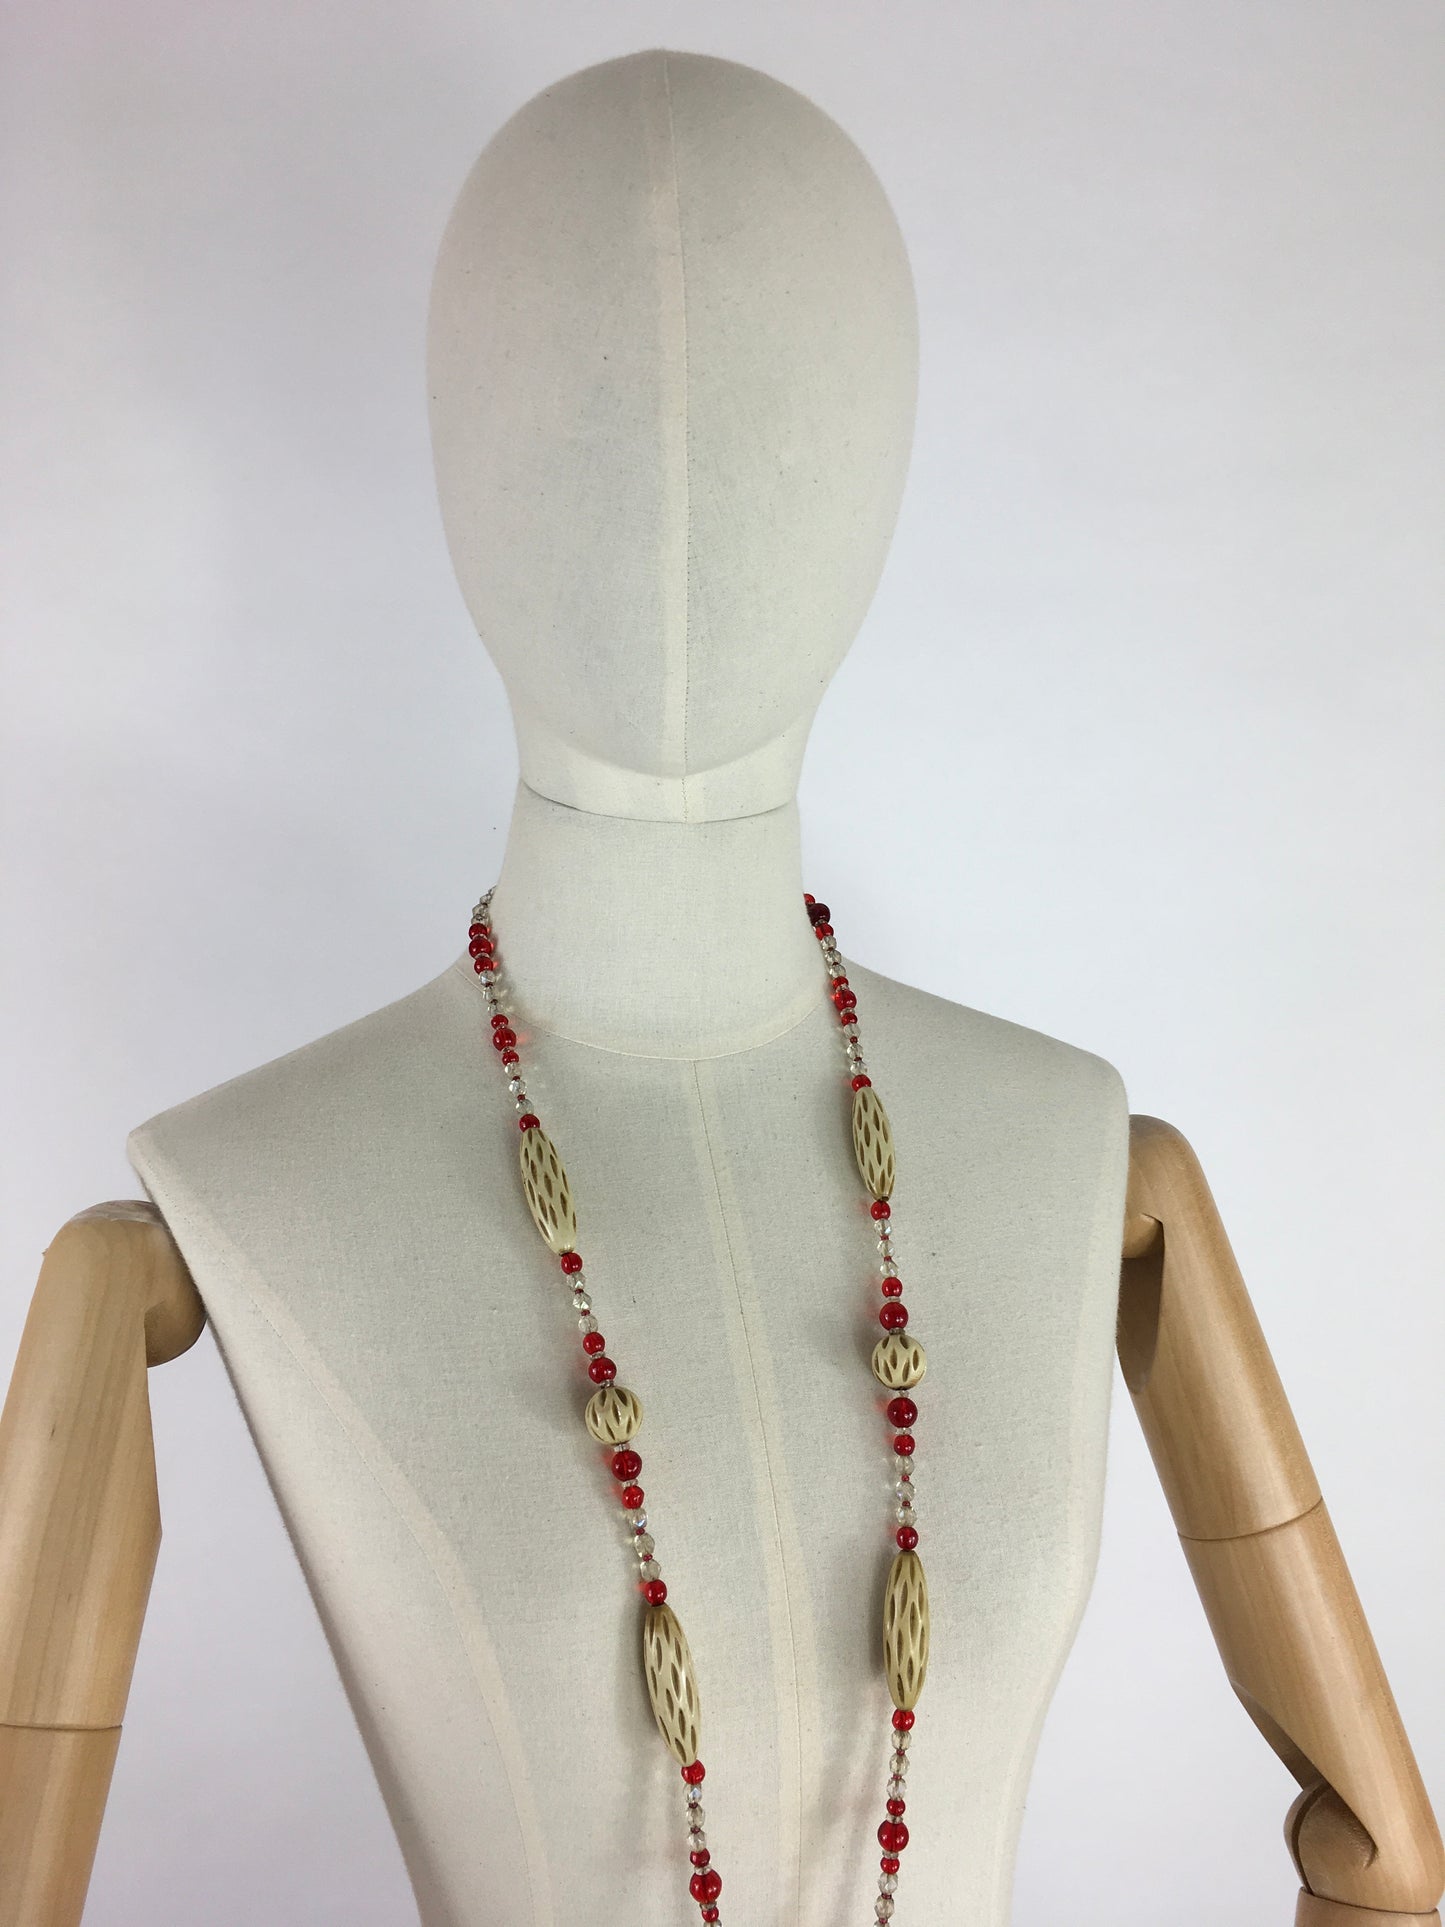 Original 1930s Long Line Necklace - In a Contrast Glass Bead and Celluloid in Reds, Clear and Soft Cream